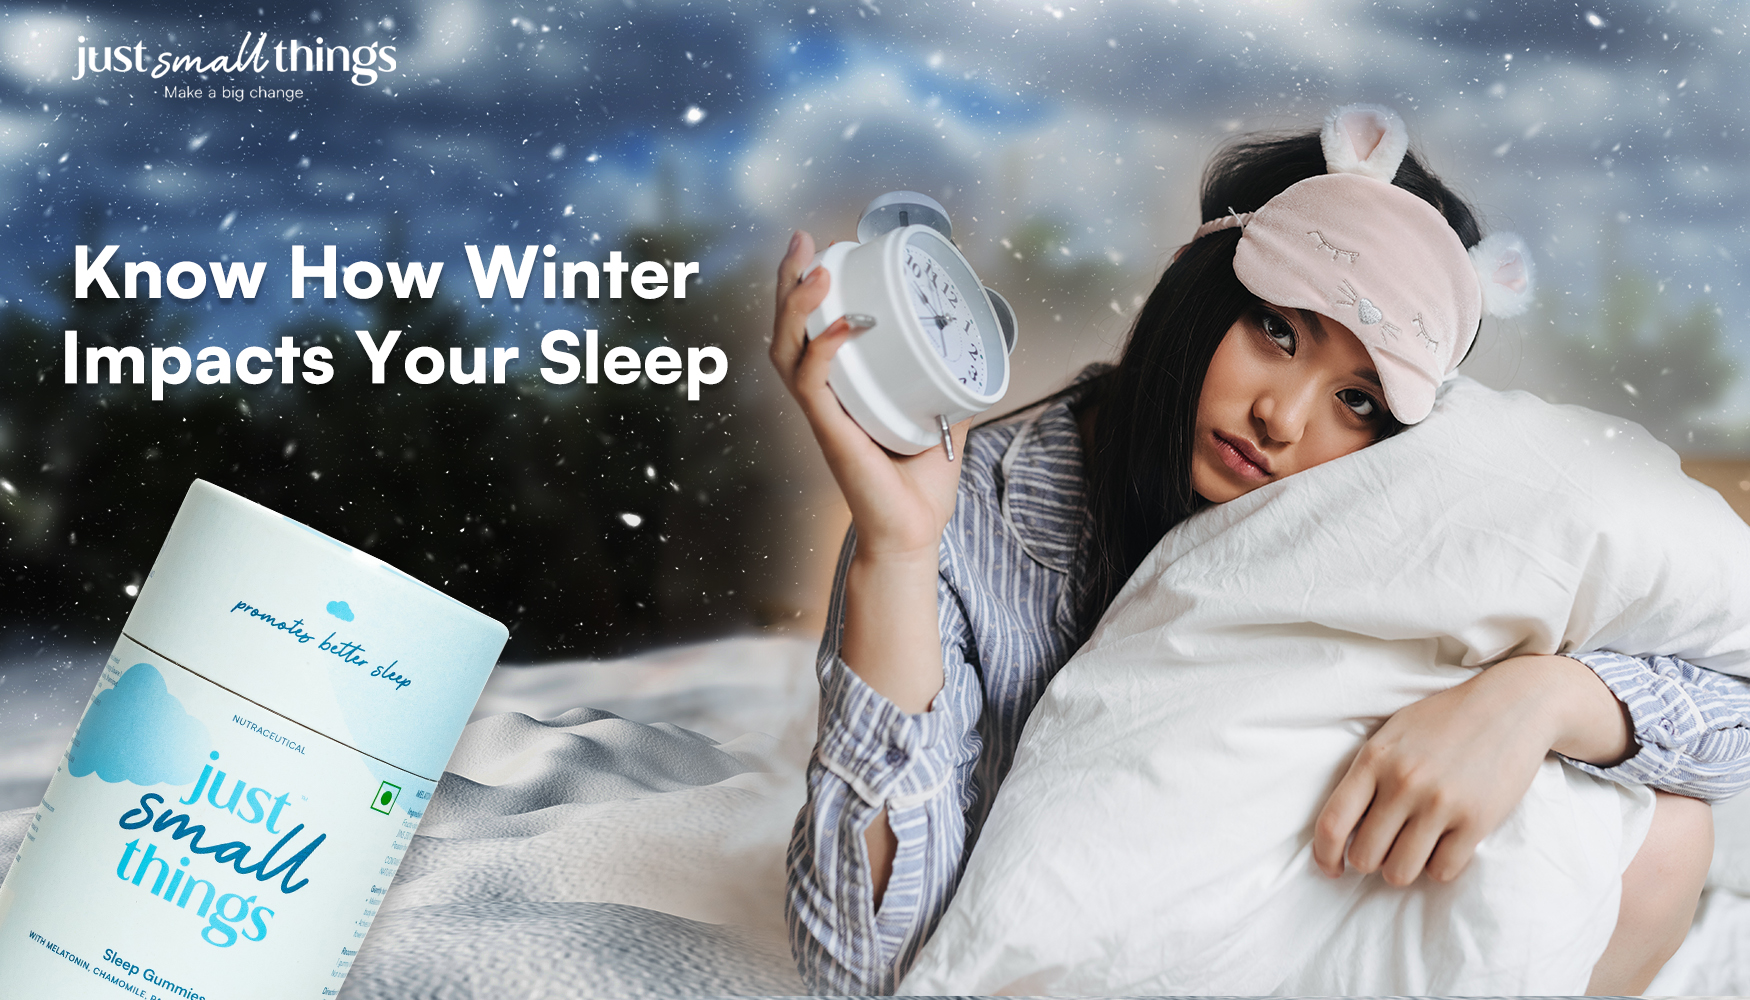 Beauty Sleep: Why You Need It More in Winter